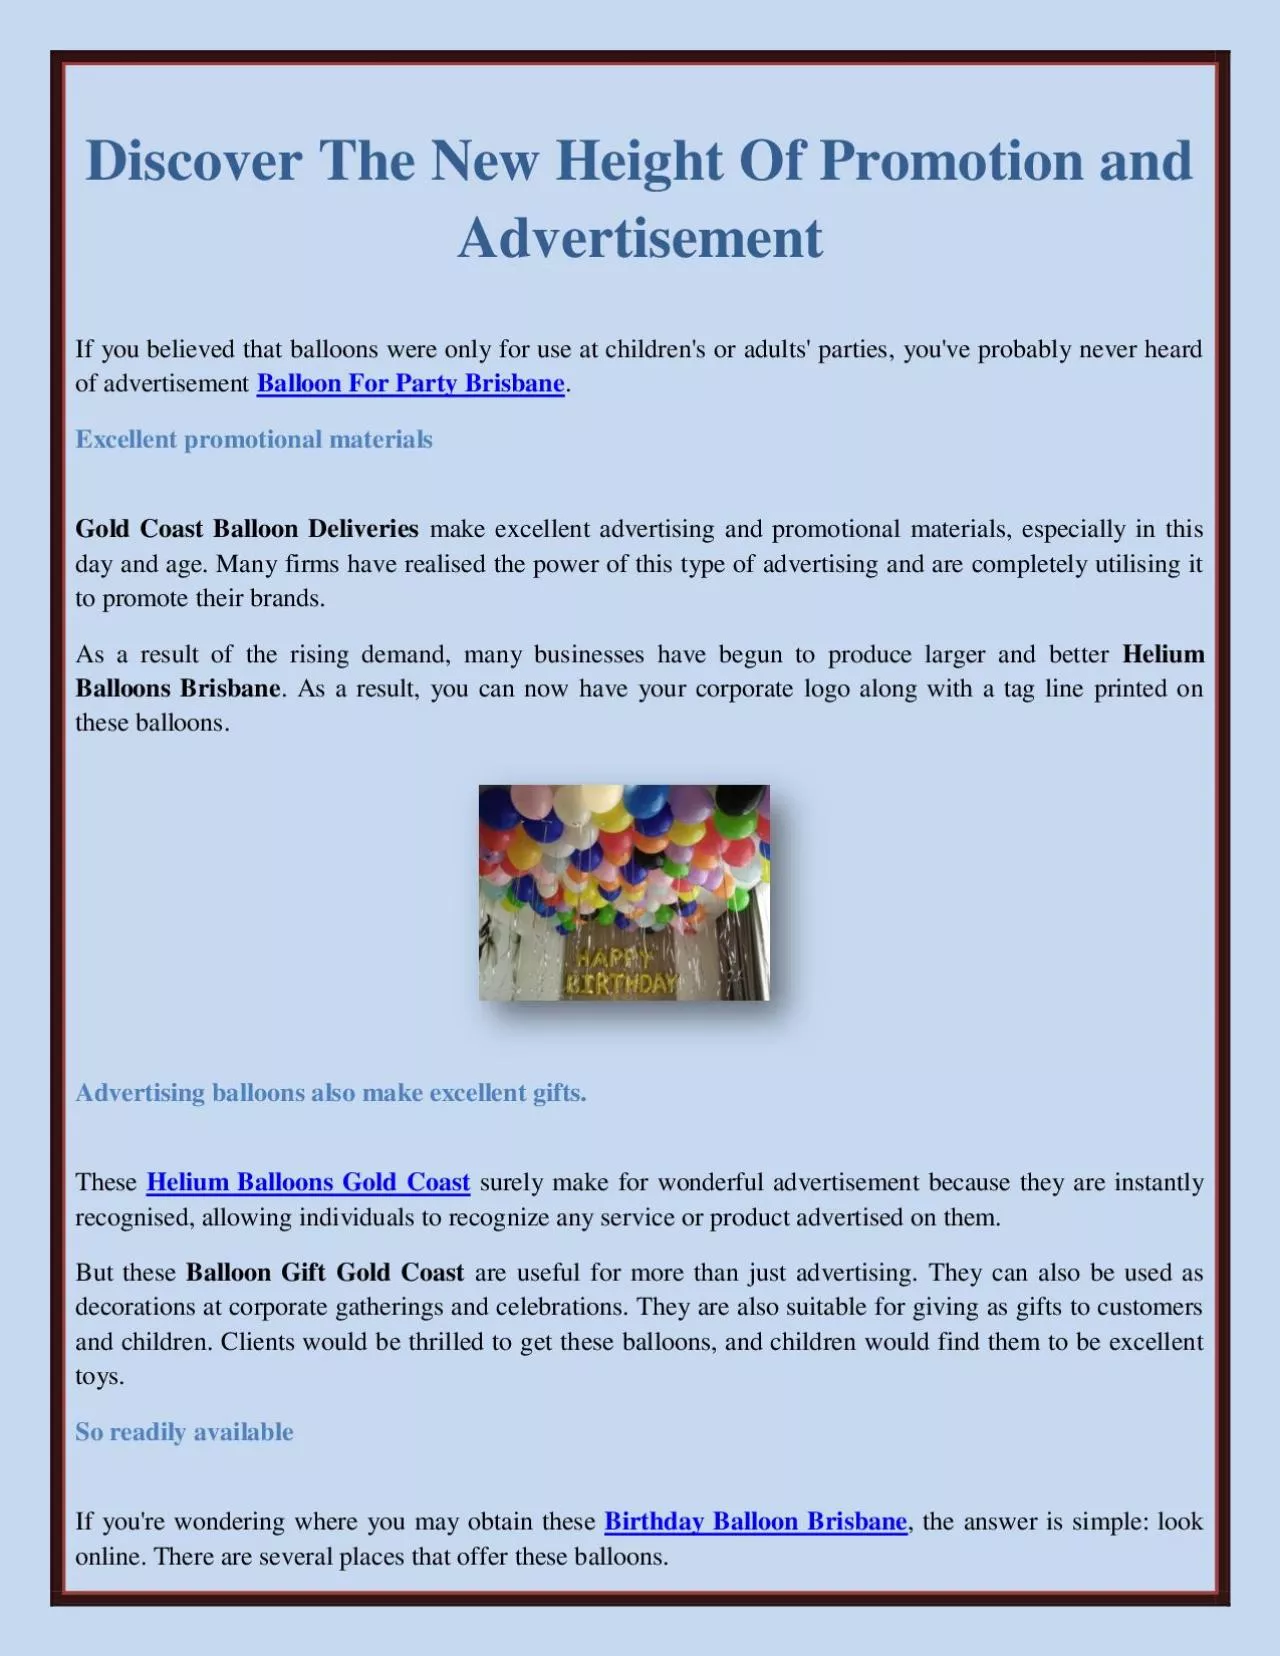 Discover The New Height Of Promotion and Advertisement